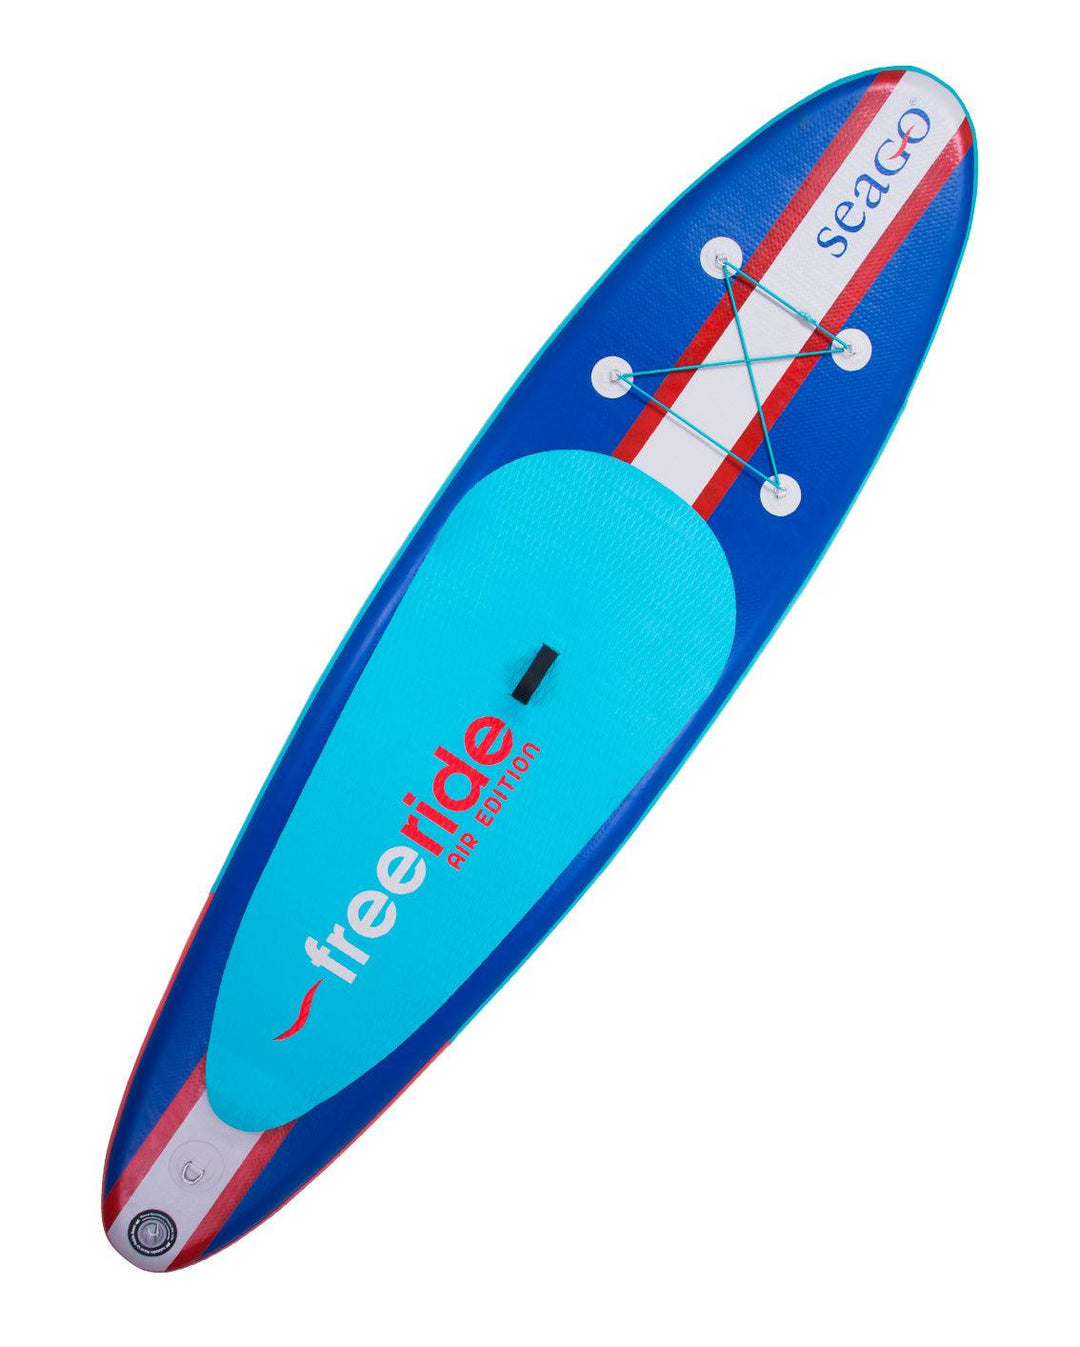 Seago Stand Up Paddleboard - Freeride Complete Kit - 4Boats